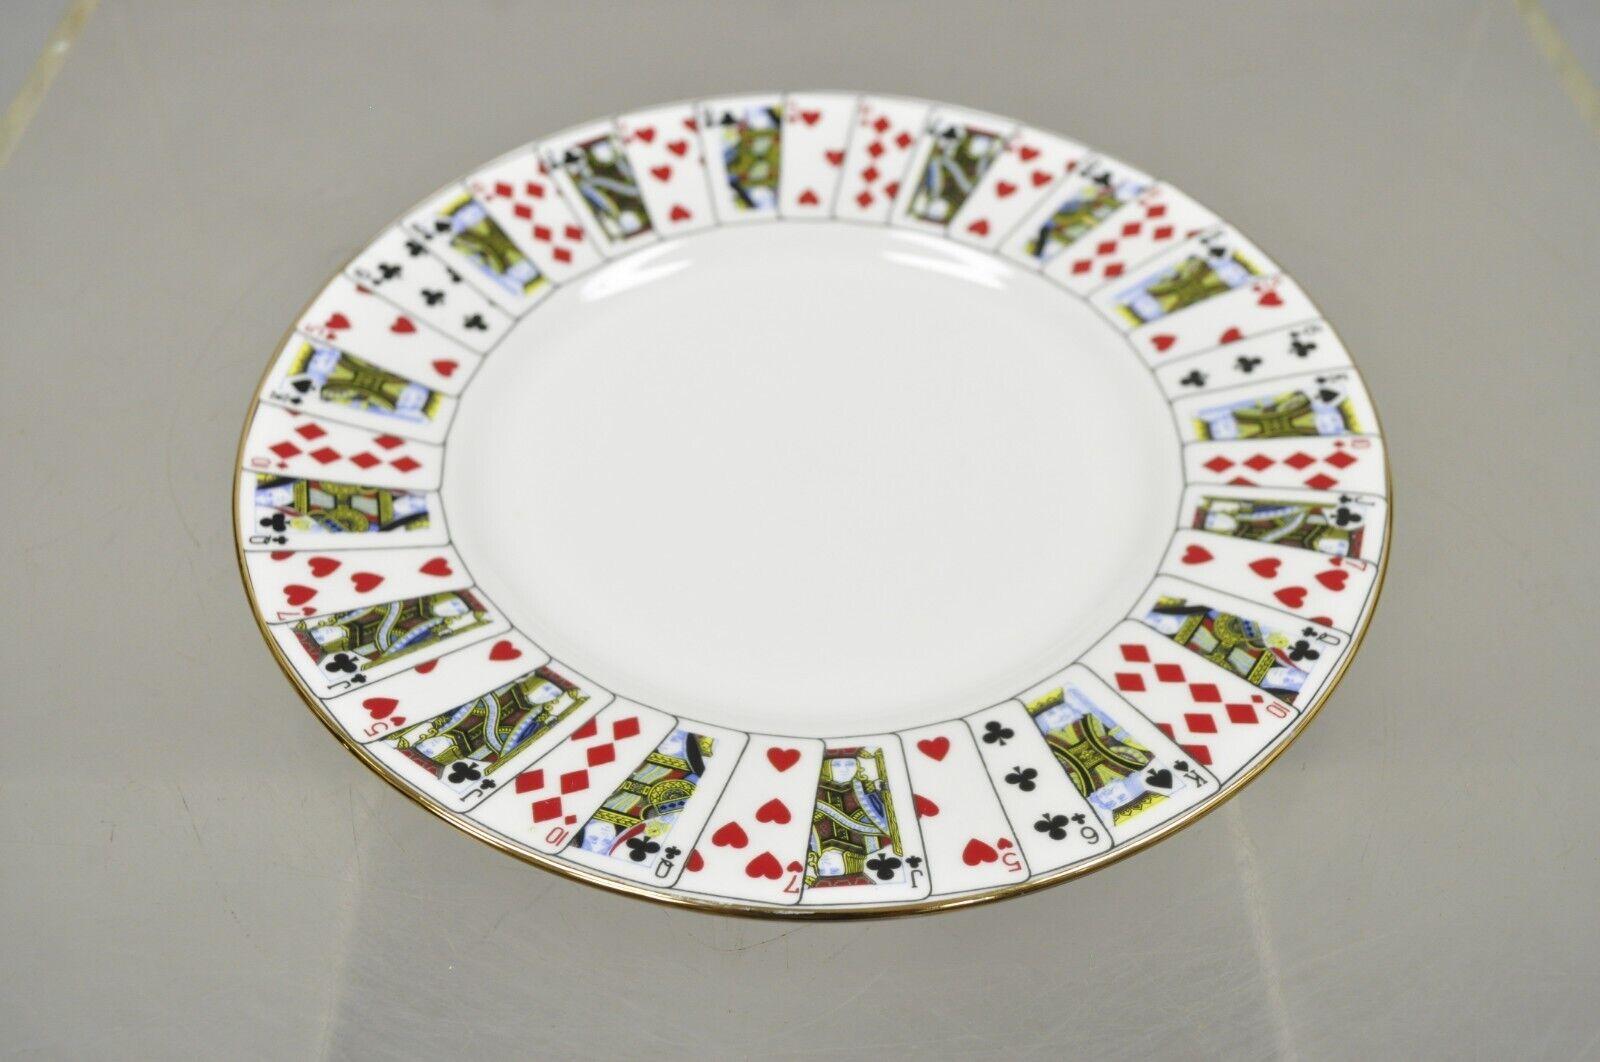 Tiffany & Co Staffordshire England Playing Cards China 8.25 Round Plates - Set of 3. (3) 8.25